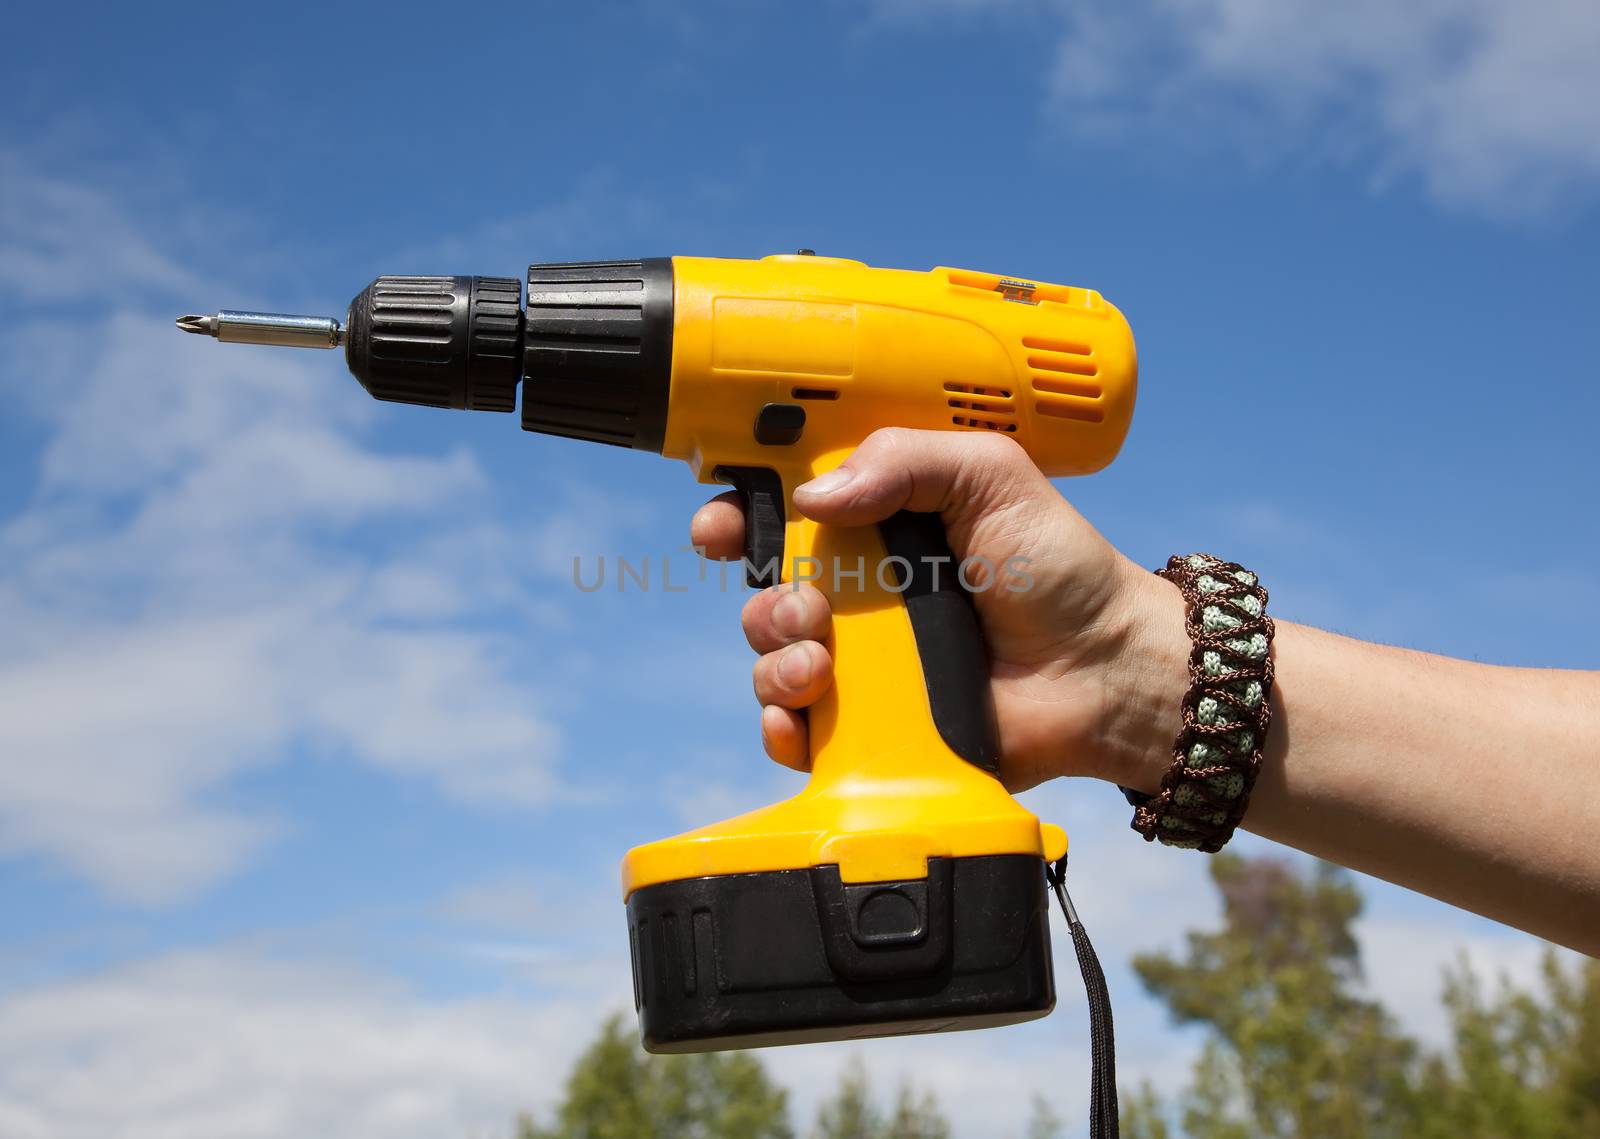 Man's hand in a yellow wristband holding screwdriver against the blue sky.